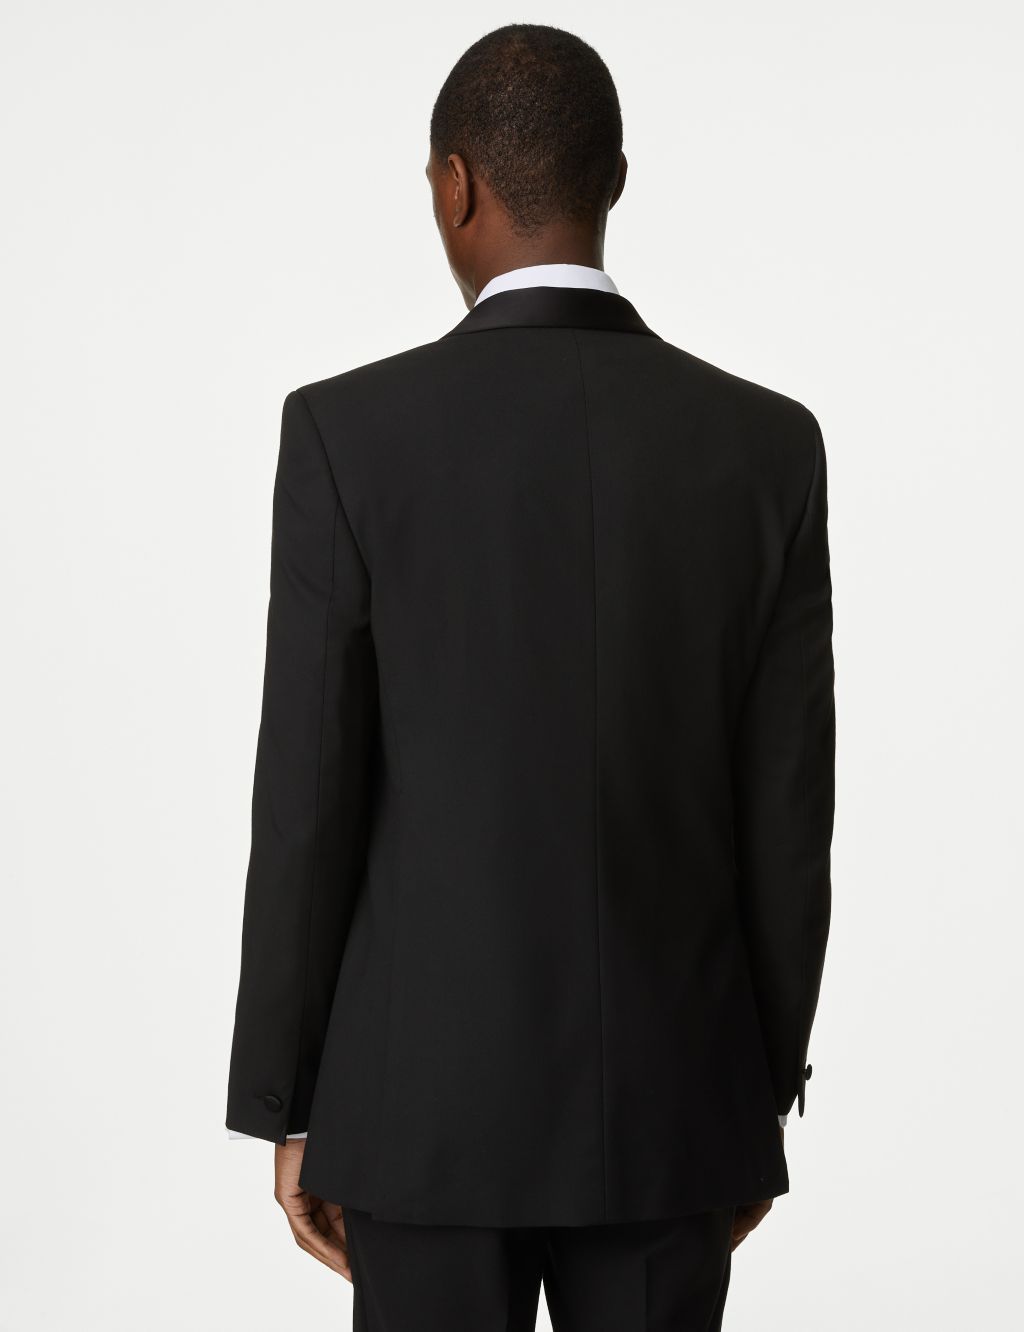 Slim Fit Stretch Tuxedo Jacket | M&S Collection | M&S